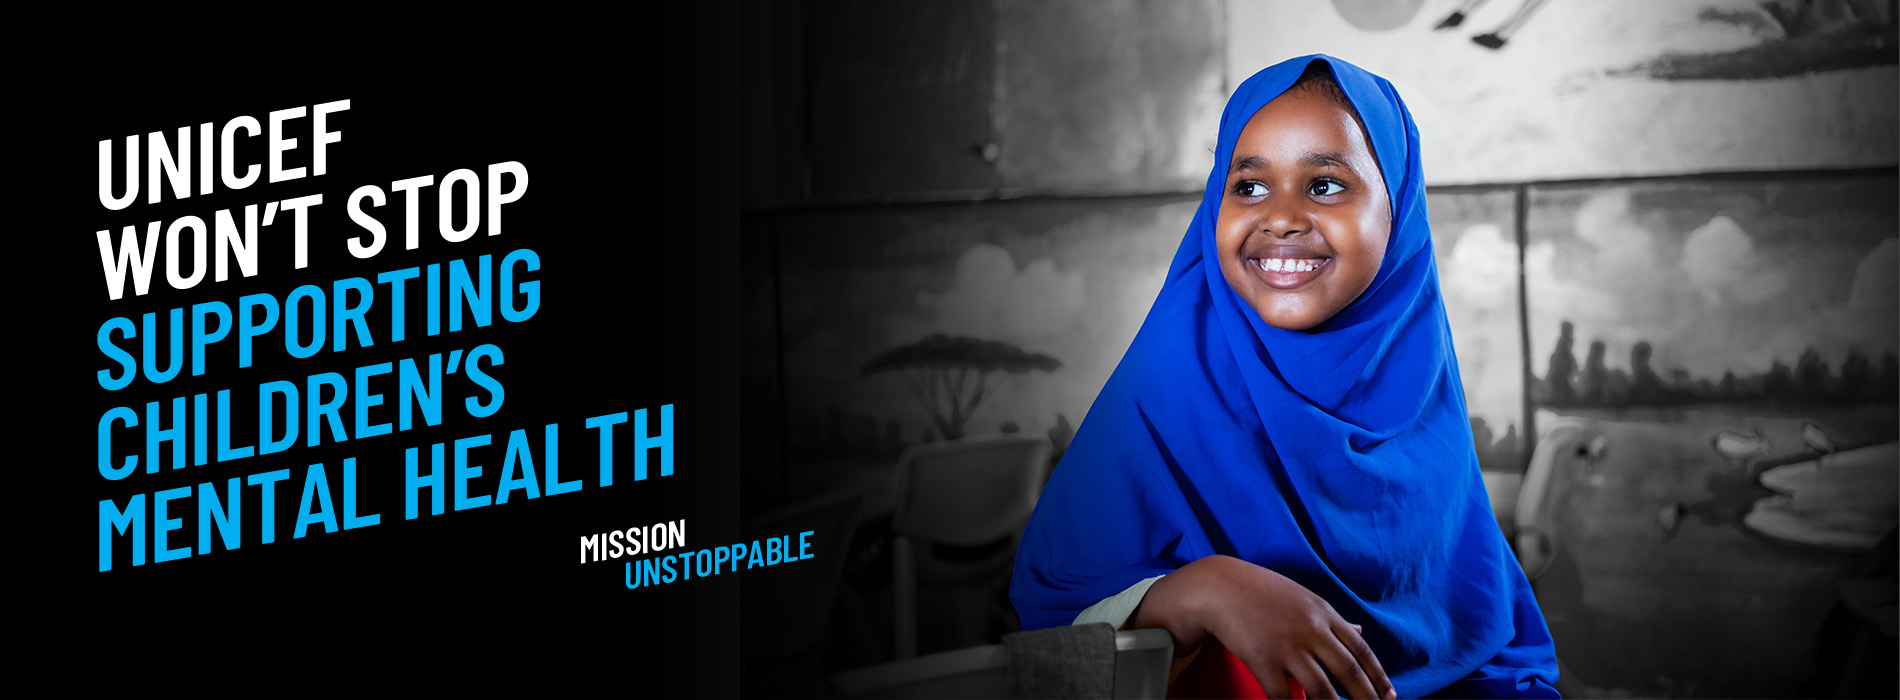 UNICEF won't stop supporting children's mental health. Mission Unstoppable